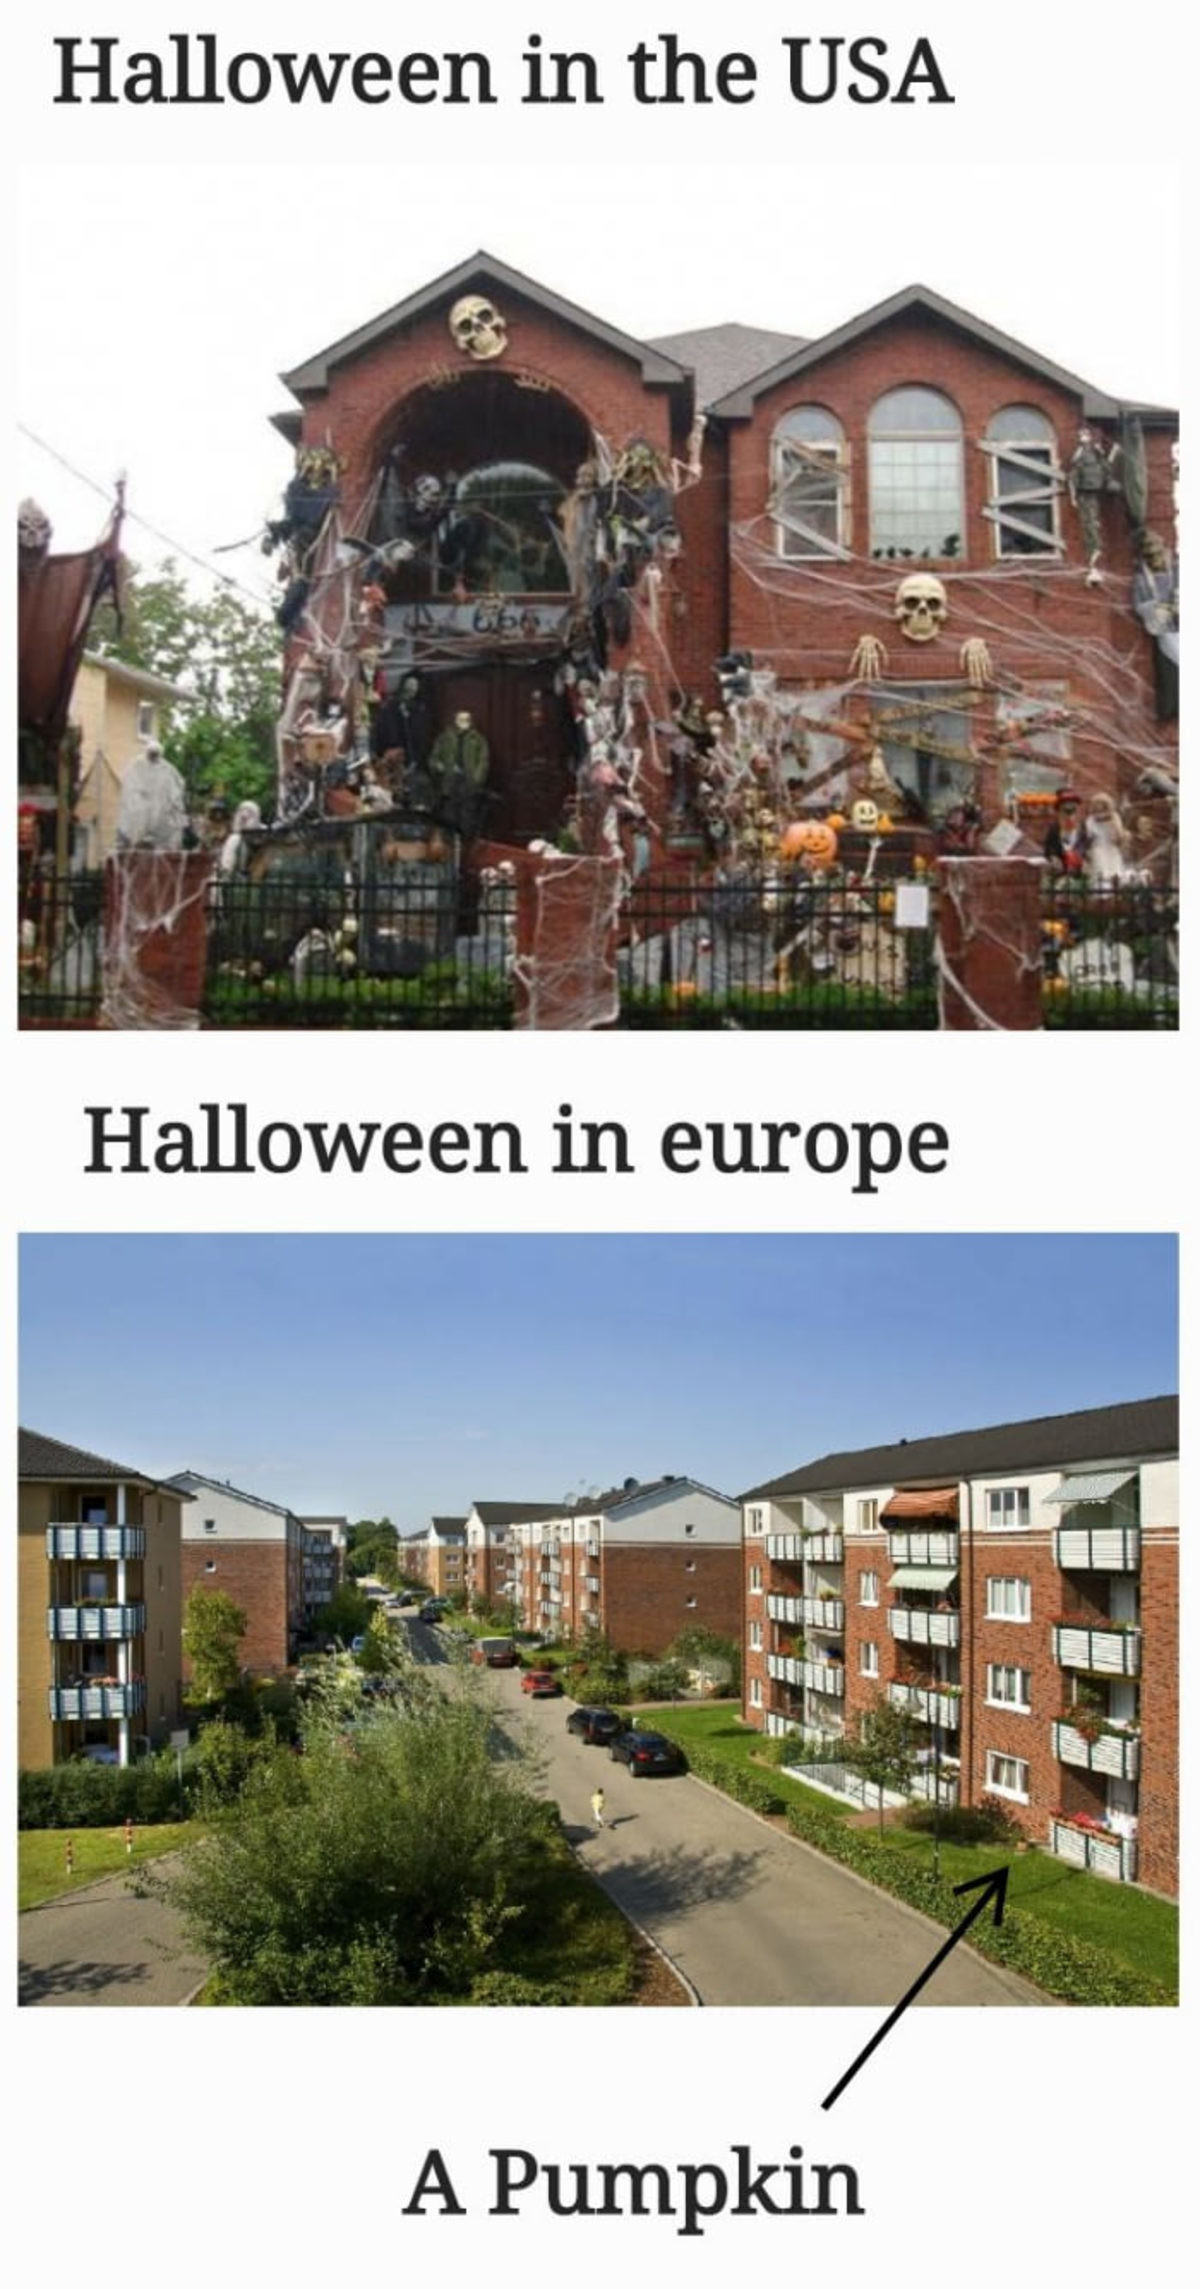 scary halloween house decorations - Halloween in the Usa Halloween in europe A Pumpkin